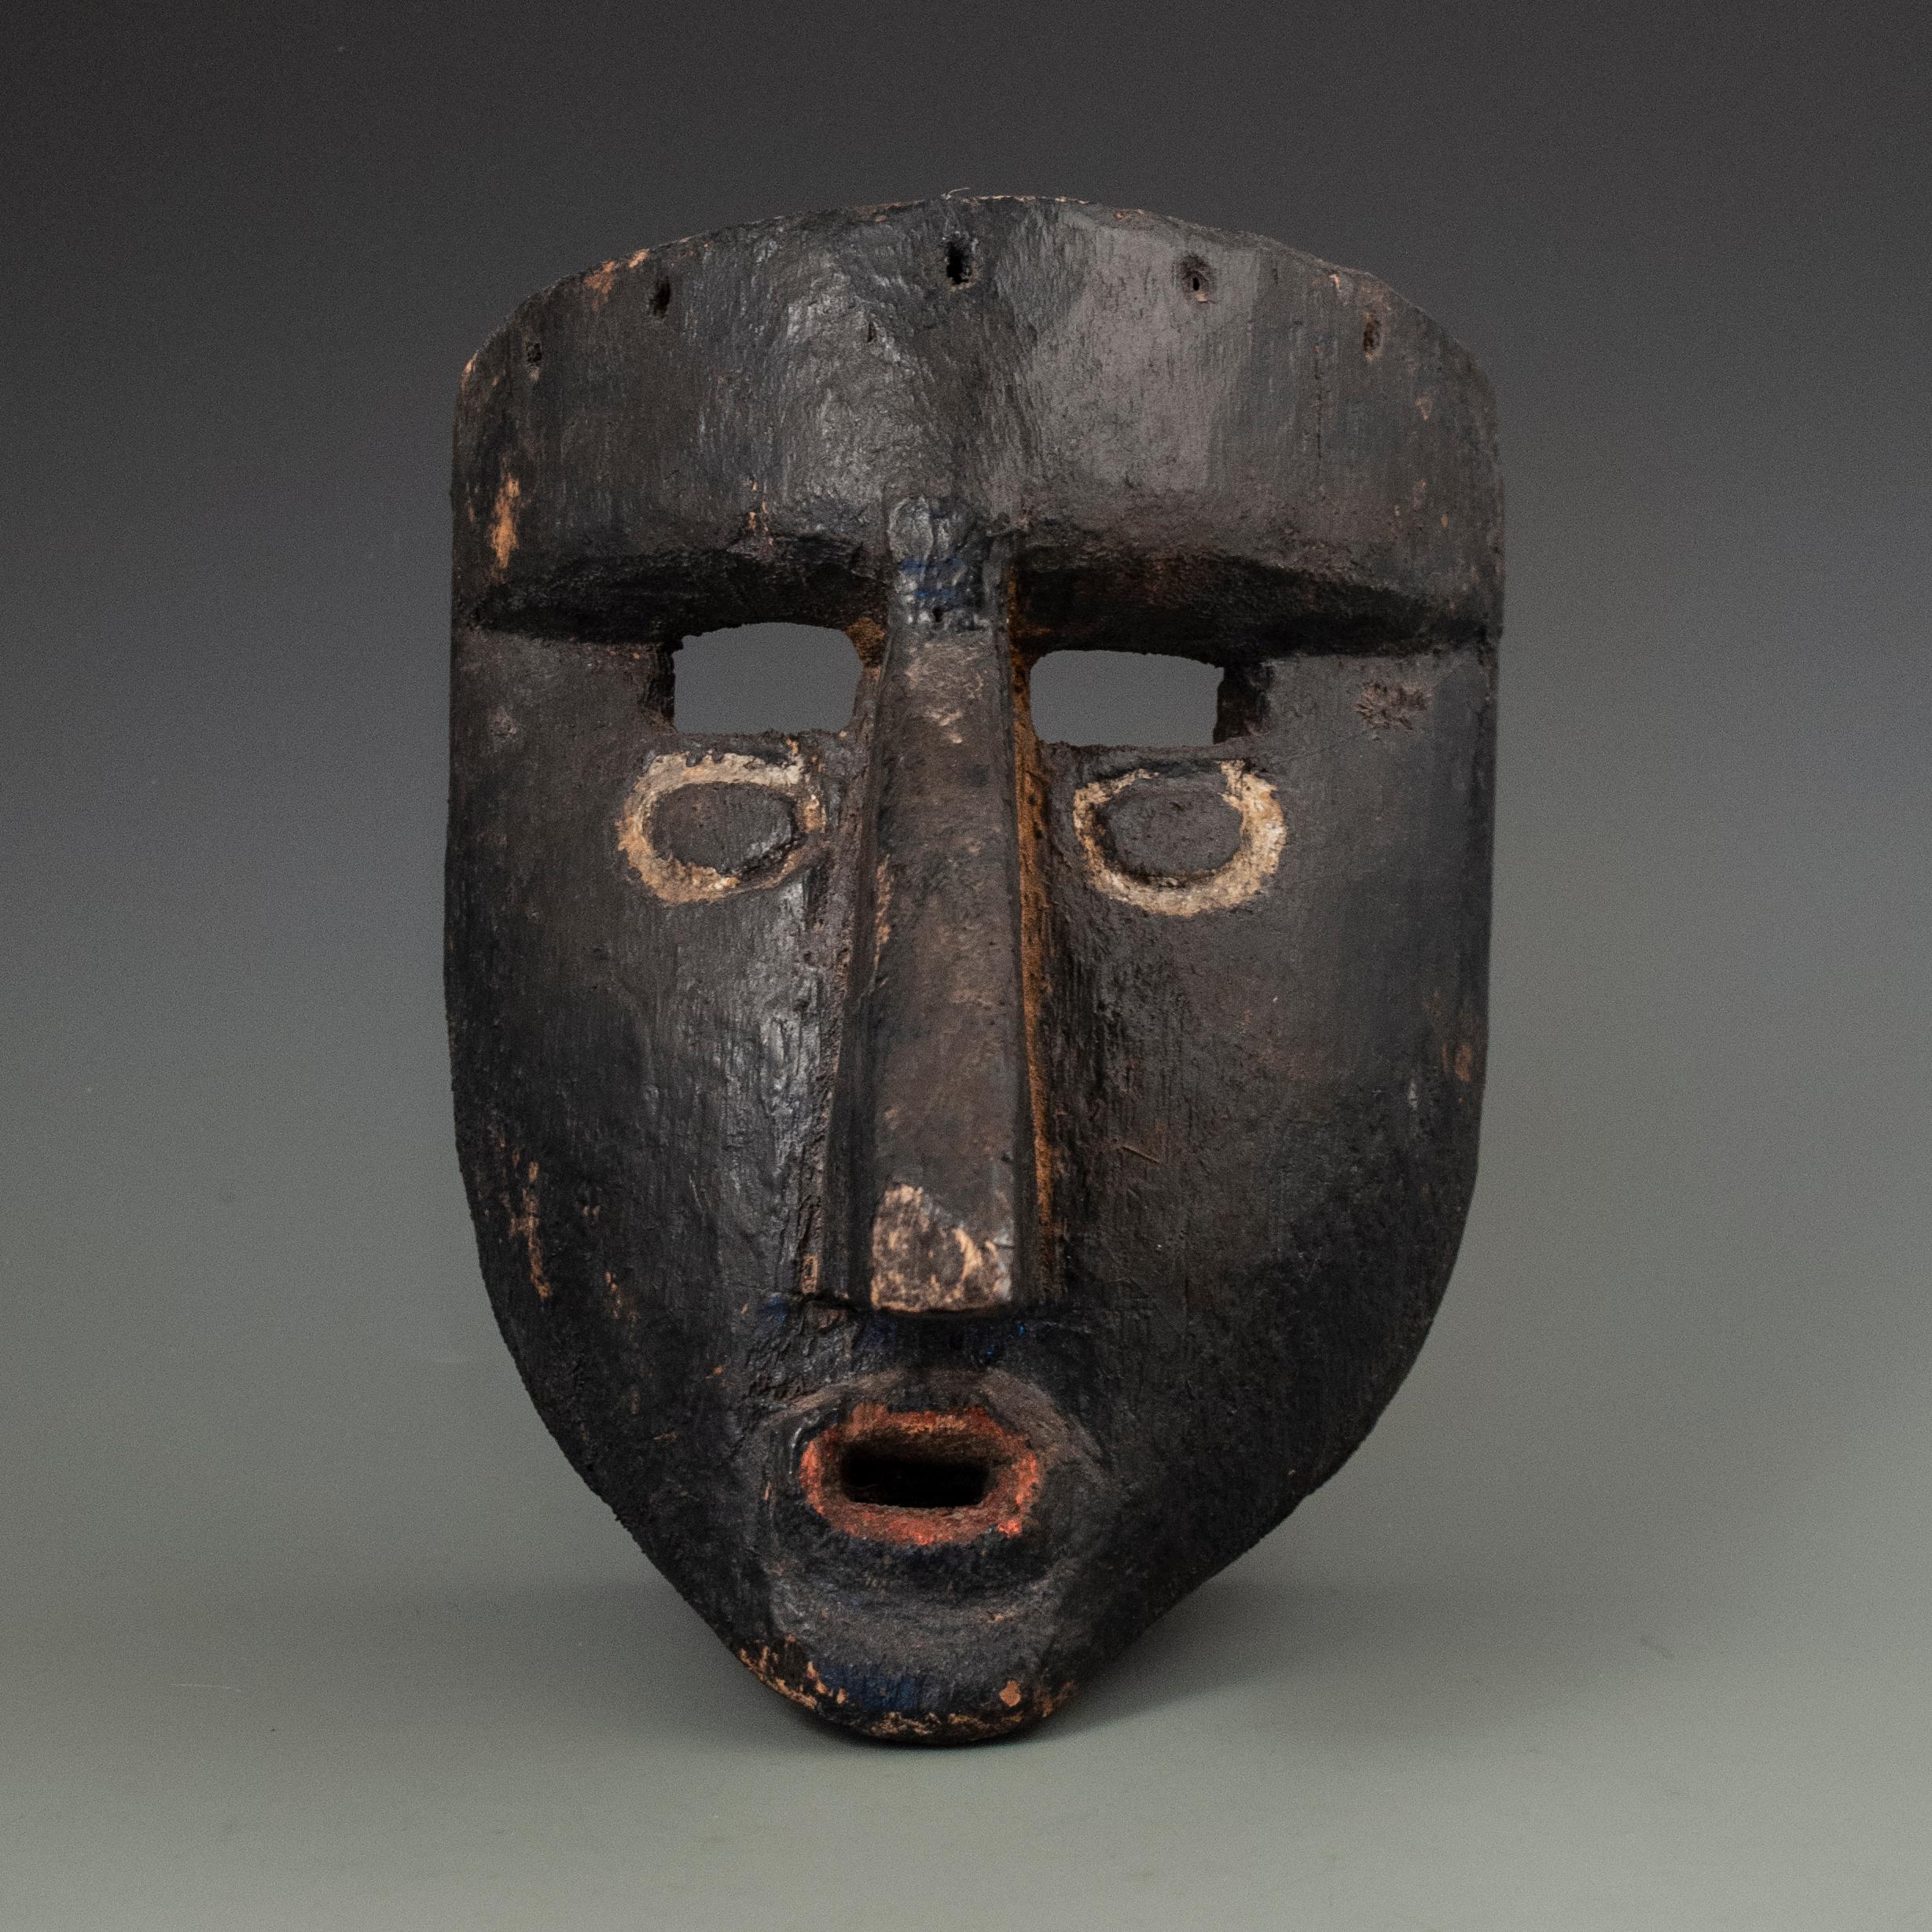 Mid-20th century black dance mask, Guerrero, Mexico

A nice old mask from Guererro, Mexico, used in the Tlacololero Dance of the Tlactapa and probably from the 1950s, has a very modern, graphic feel to it. The nose has suffered a bit from a fall and